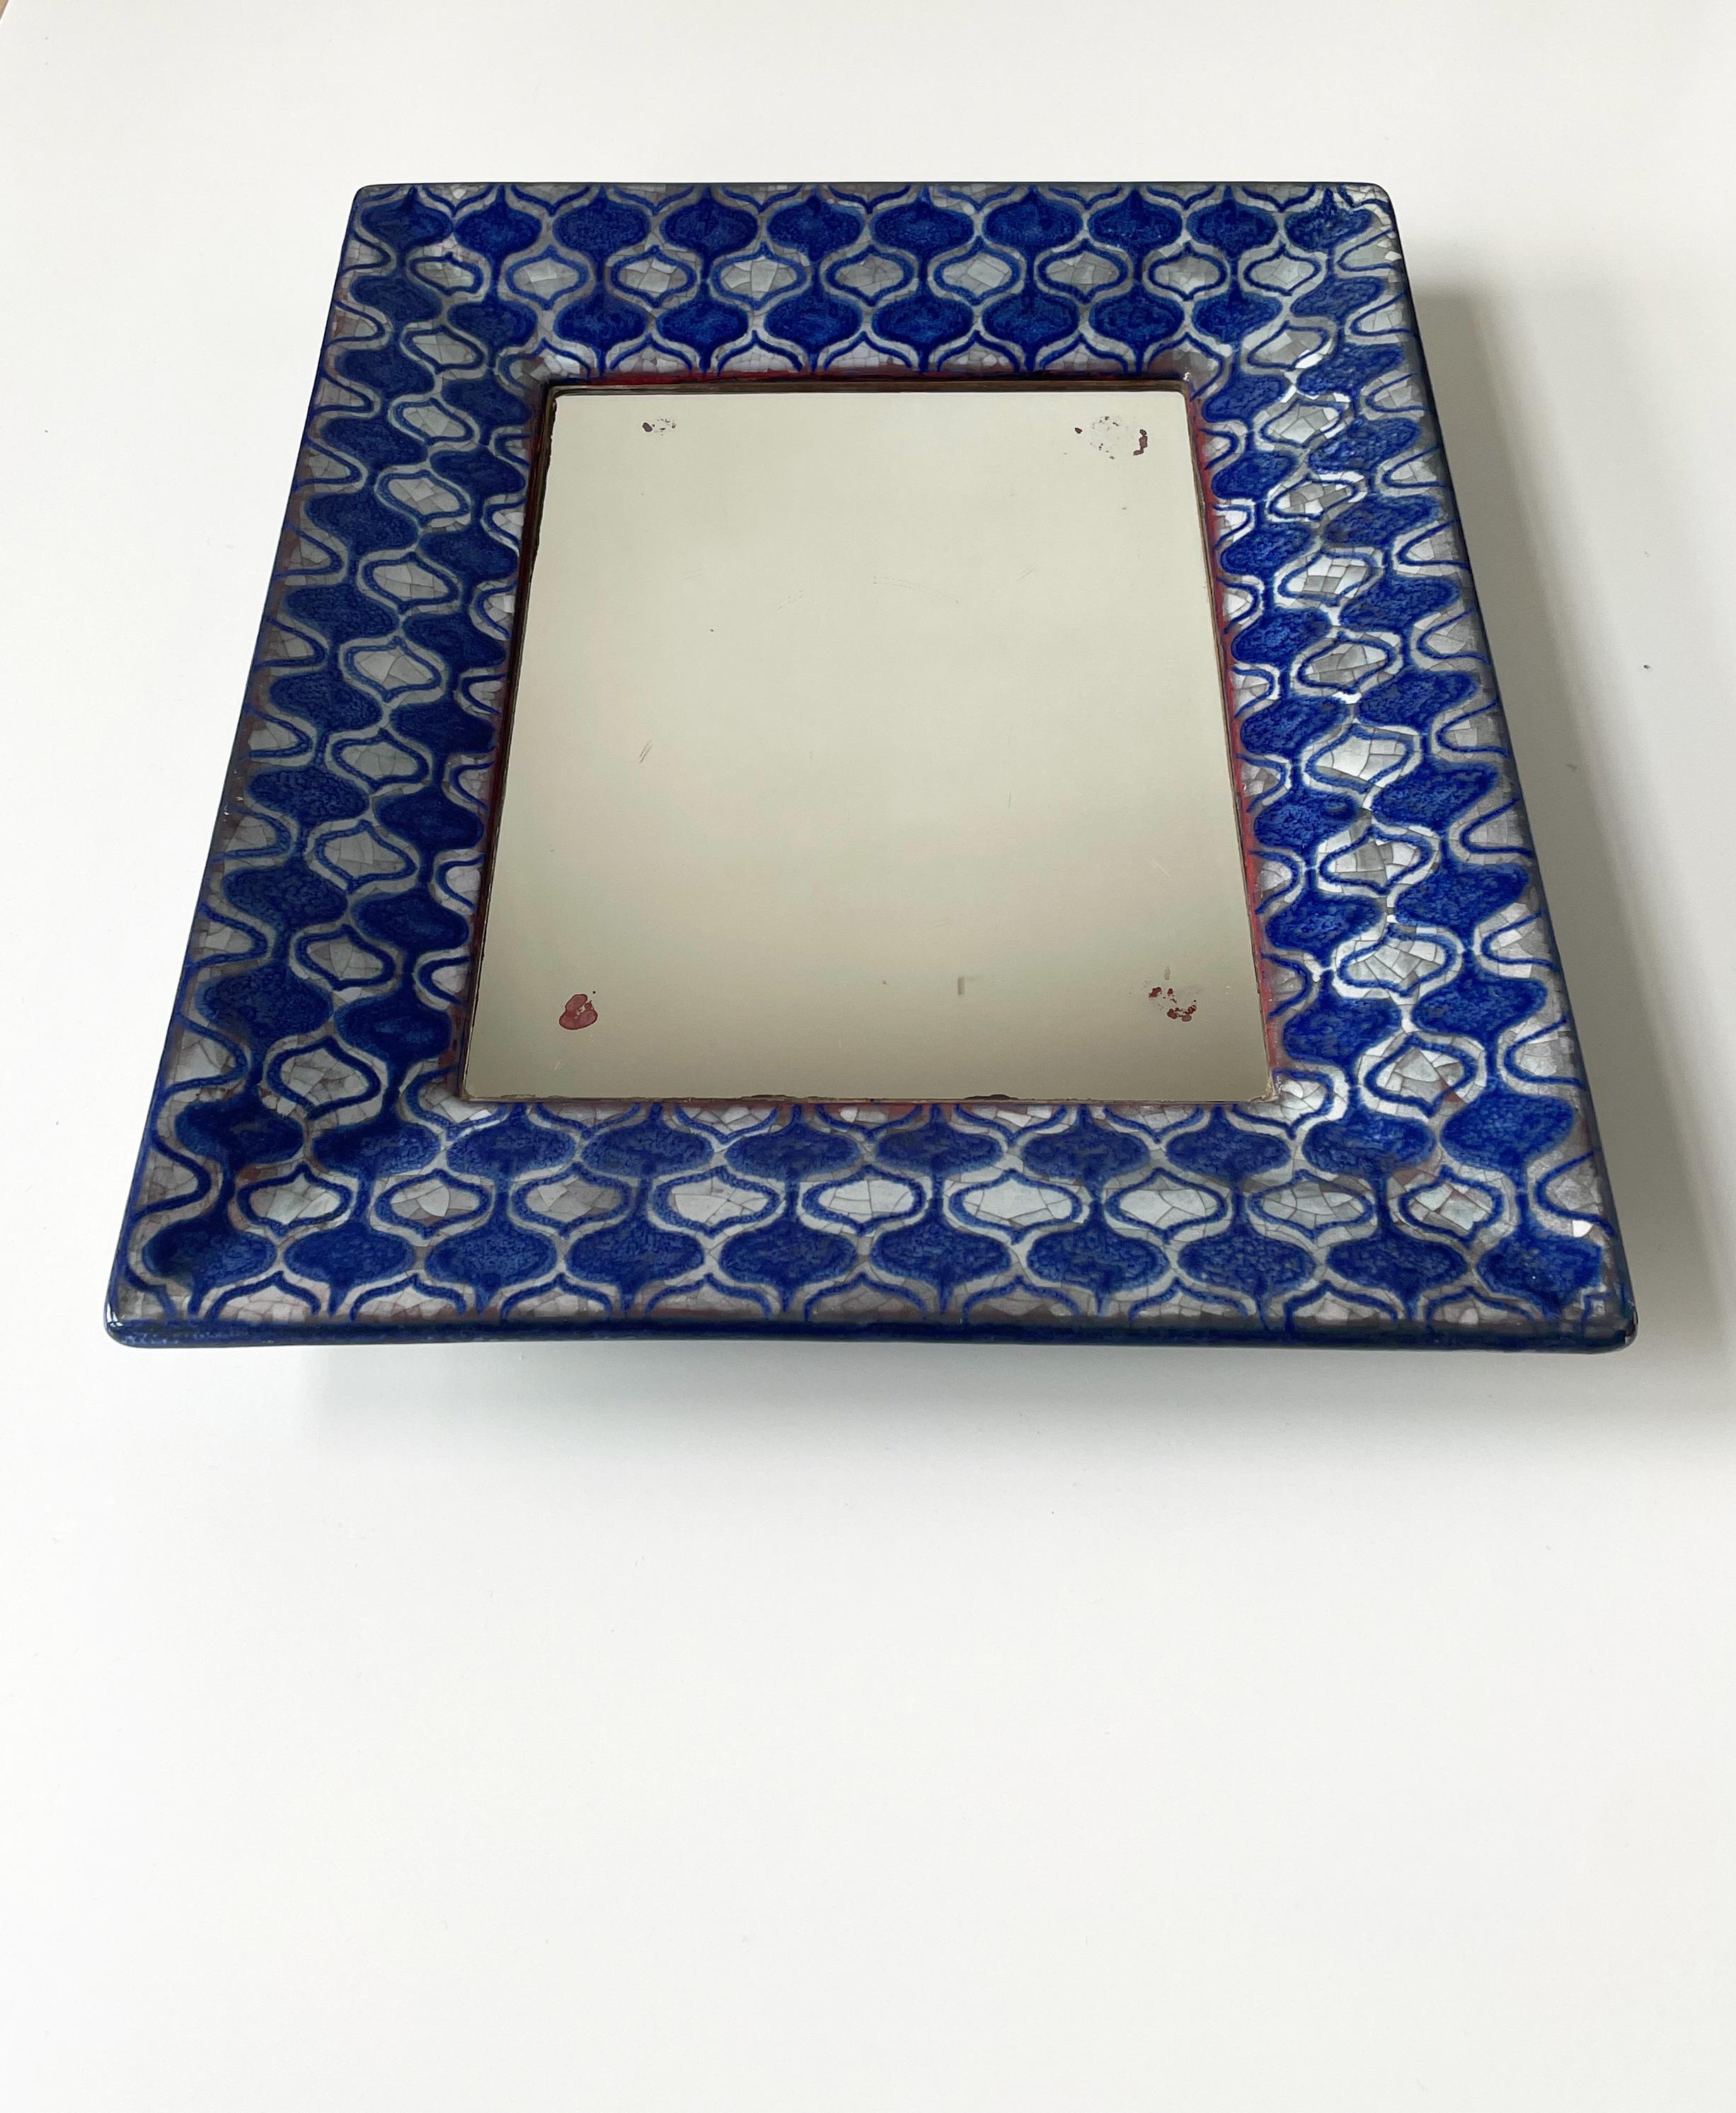 Hand-Painted Vintage Persia Glazed Ceramic Wall Mirror, Michael Andersen, 1960s For Sale